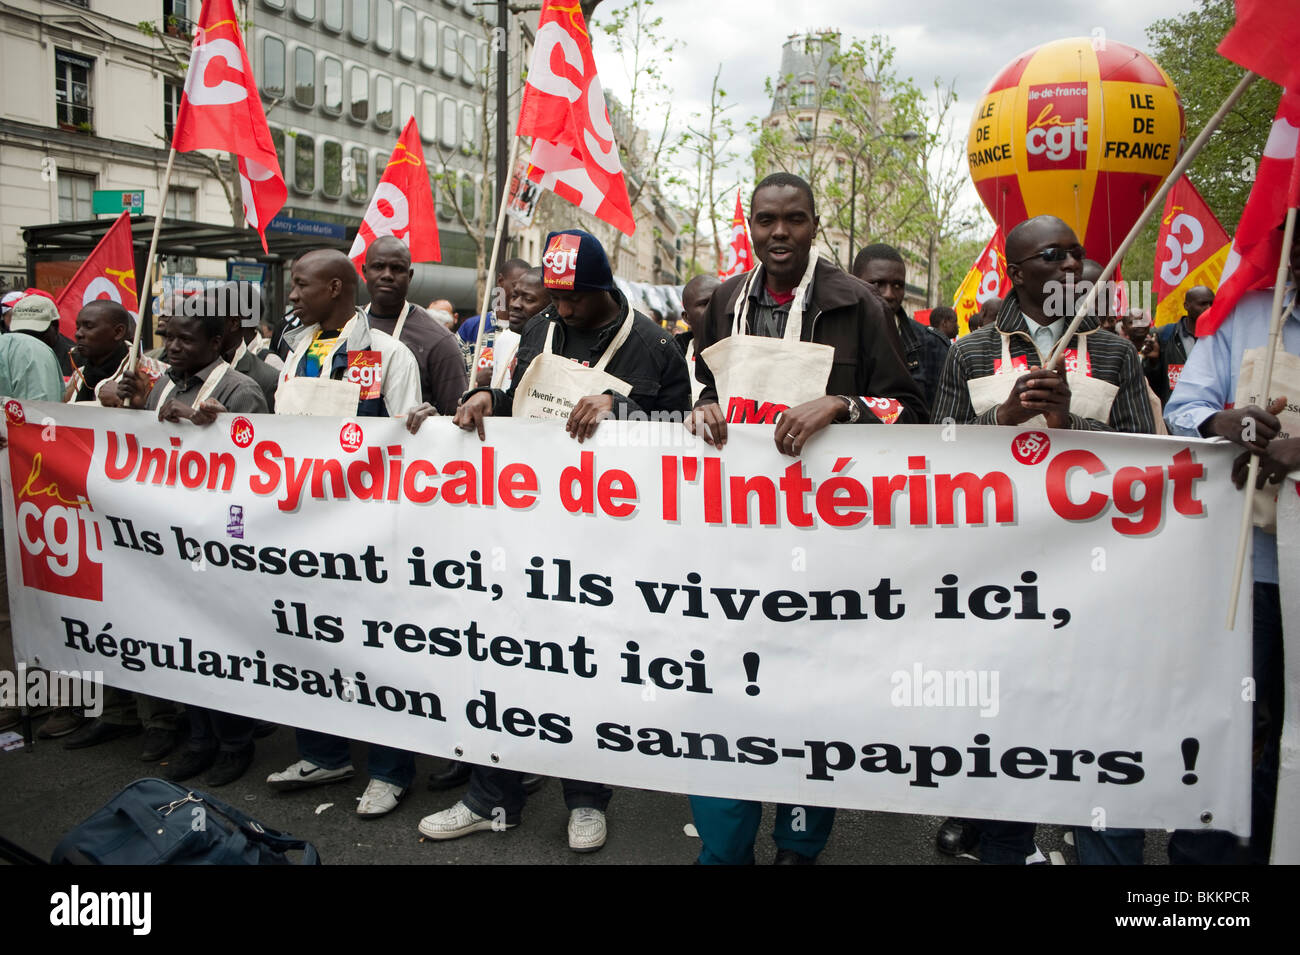 Demonstration Crowds, France's illegal aliens Sans Papiers Migrants, and trade unions protest , Paris, France; Marching with Banners, Flags, labour workers rights protests, peaceful protest sign, illegal migrants Stock Photo